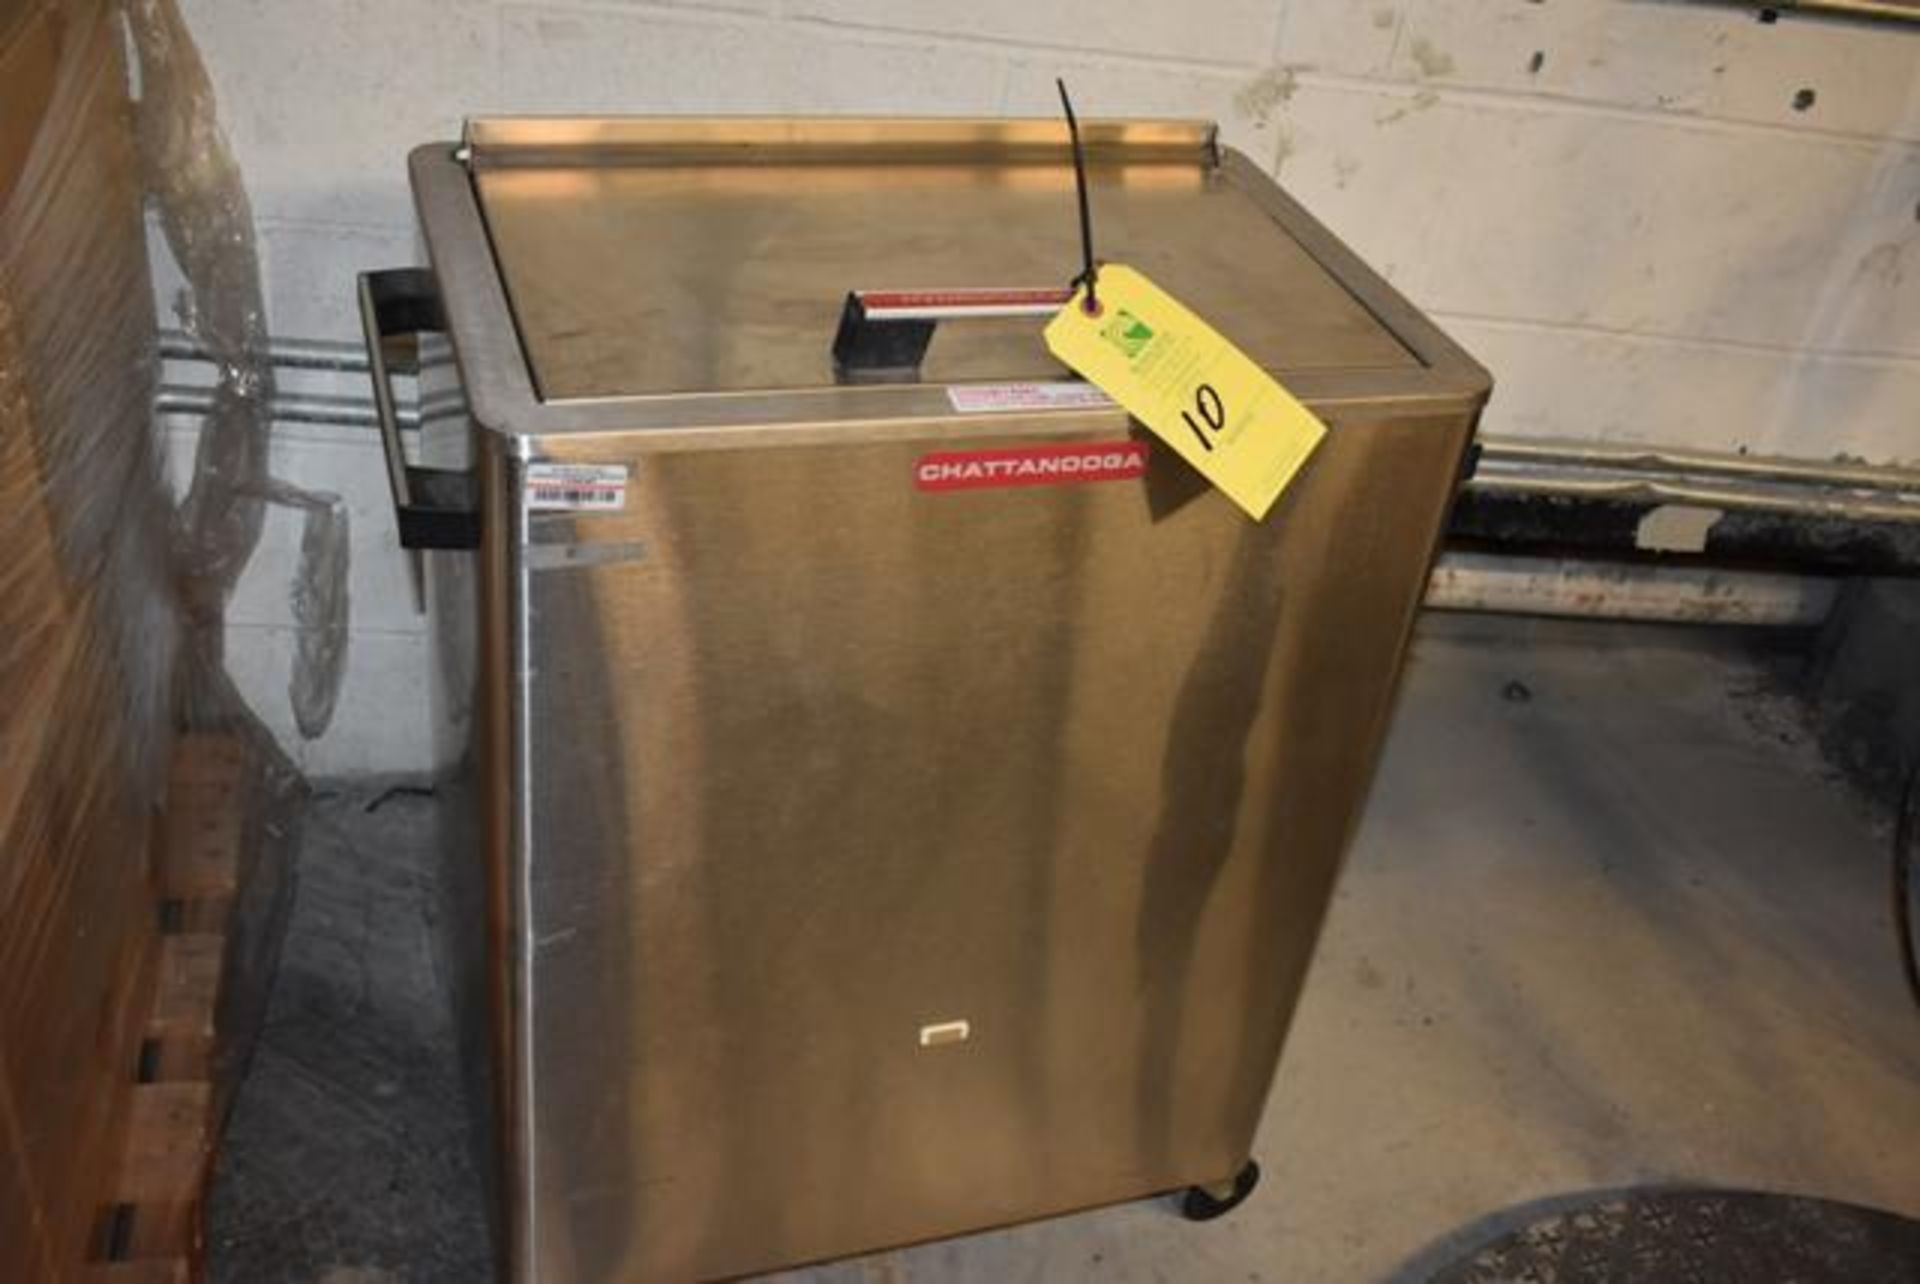 Chattanooga Model #2402 Hydrocoallator Hot Pack Heater, Serial #63269 | Required Rigging and Loading